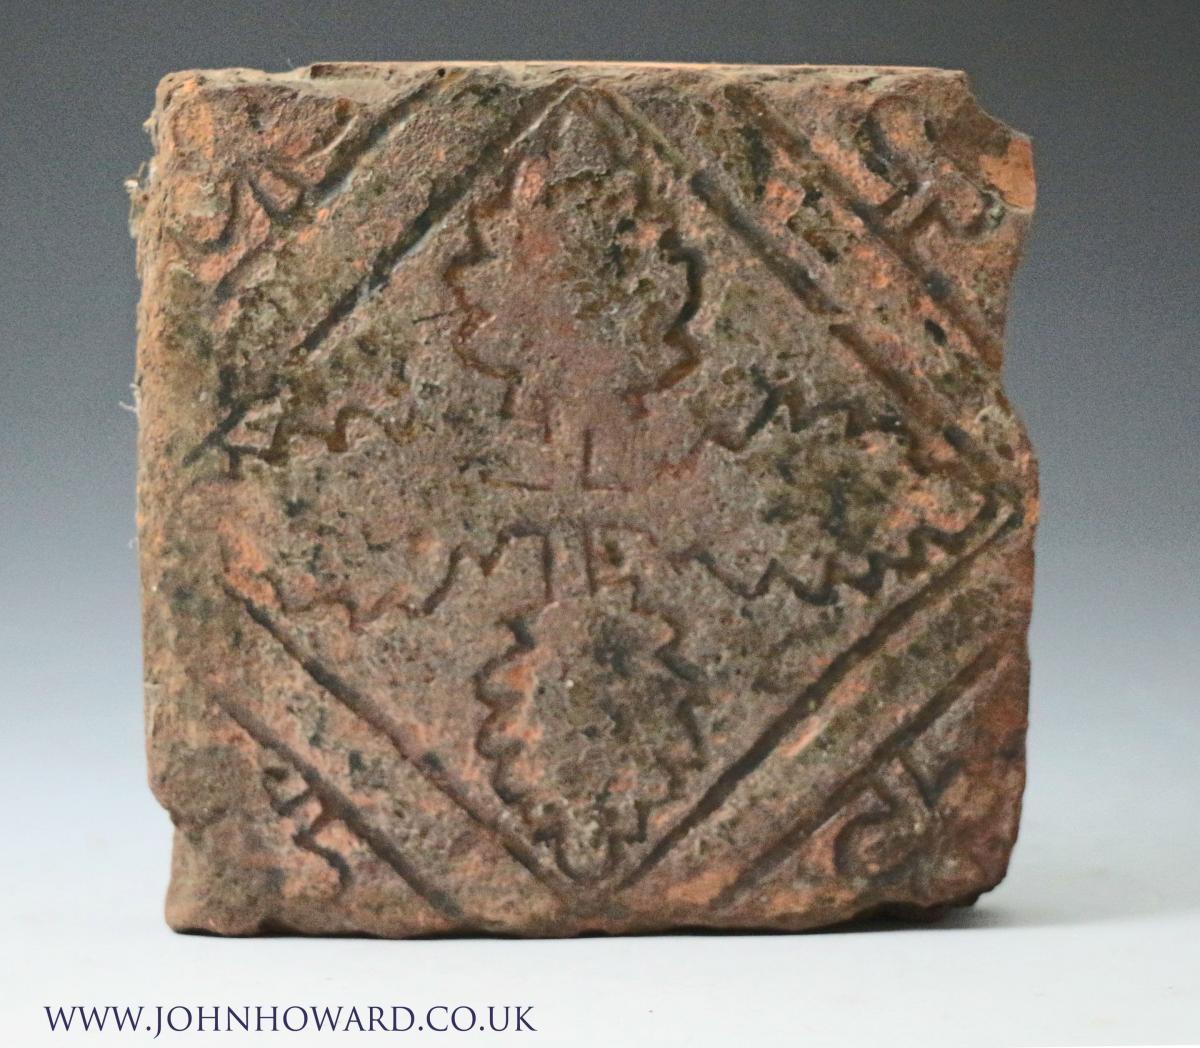 Medieval Tile relief type with oak leaves 14th century England